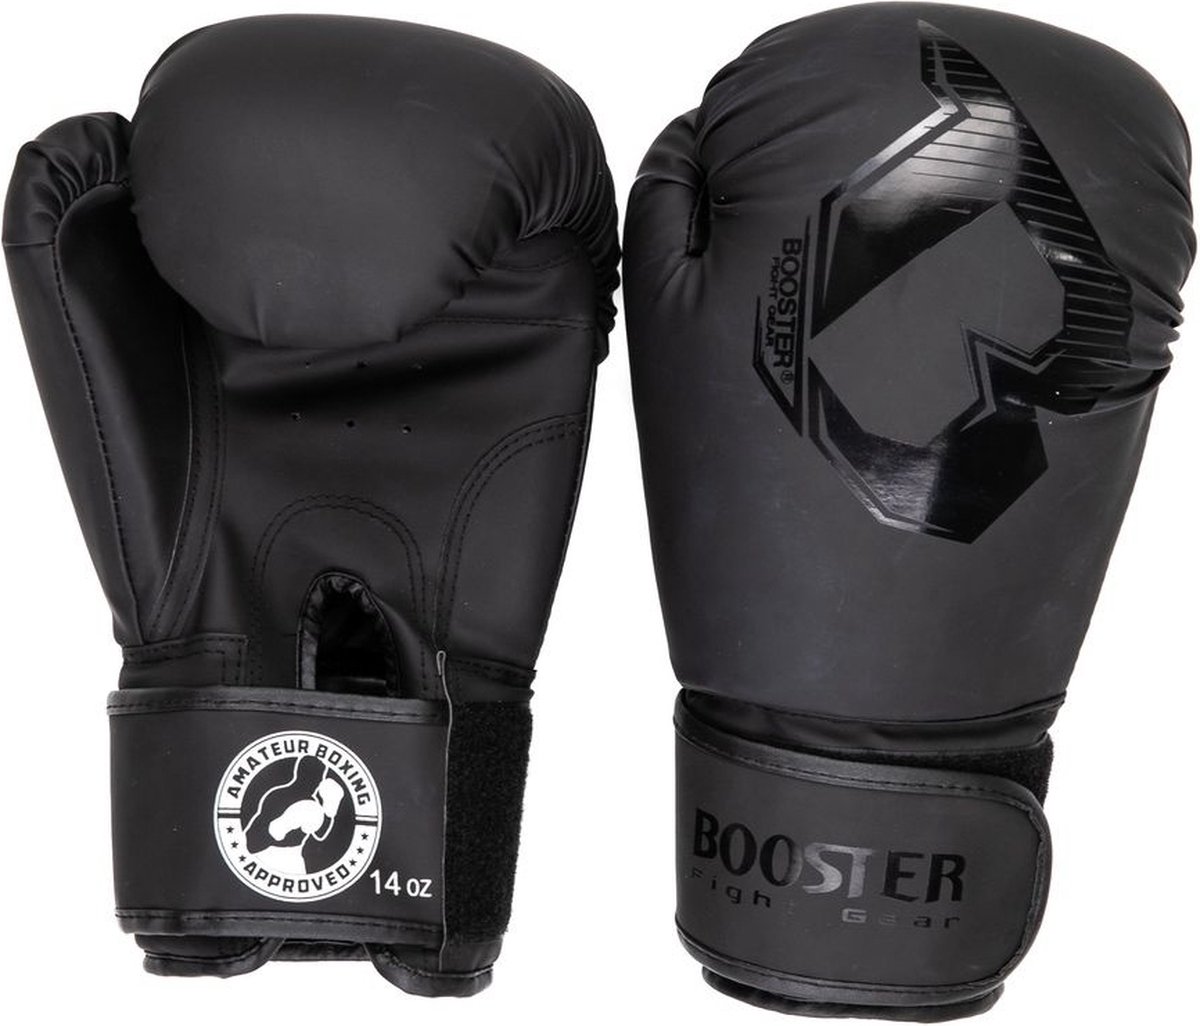 Booster Fightgear - Boxing Approved - 10 oz